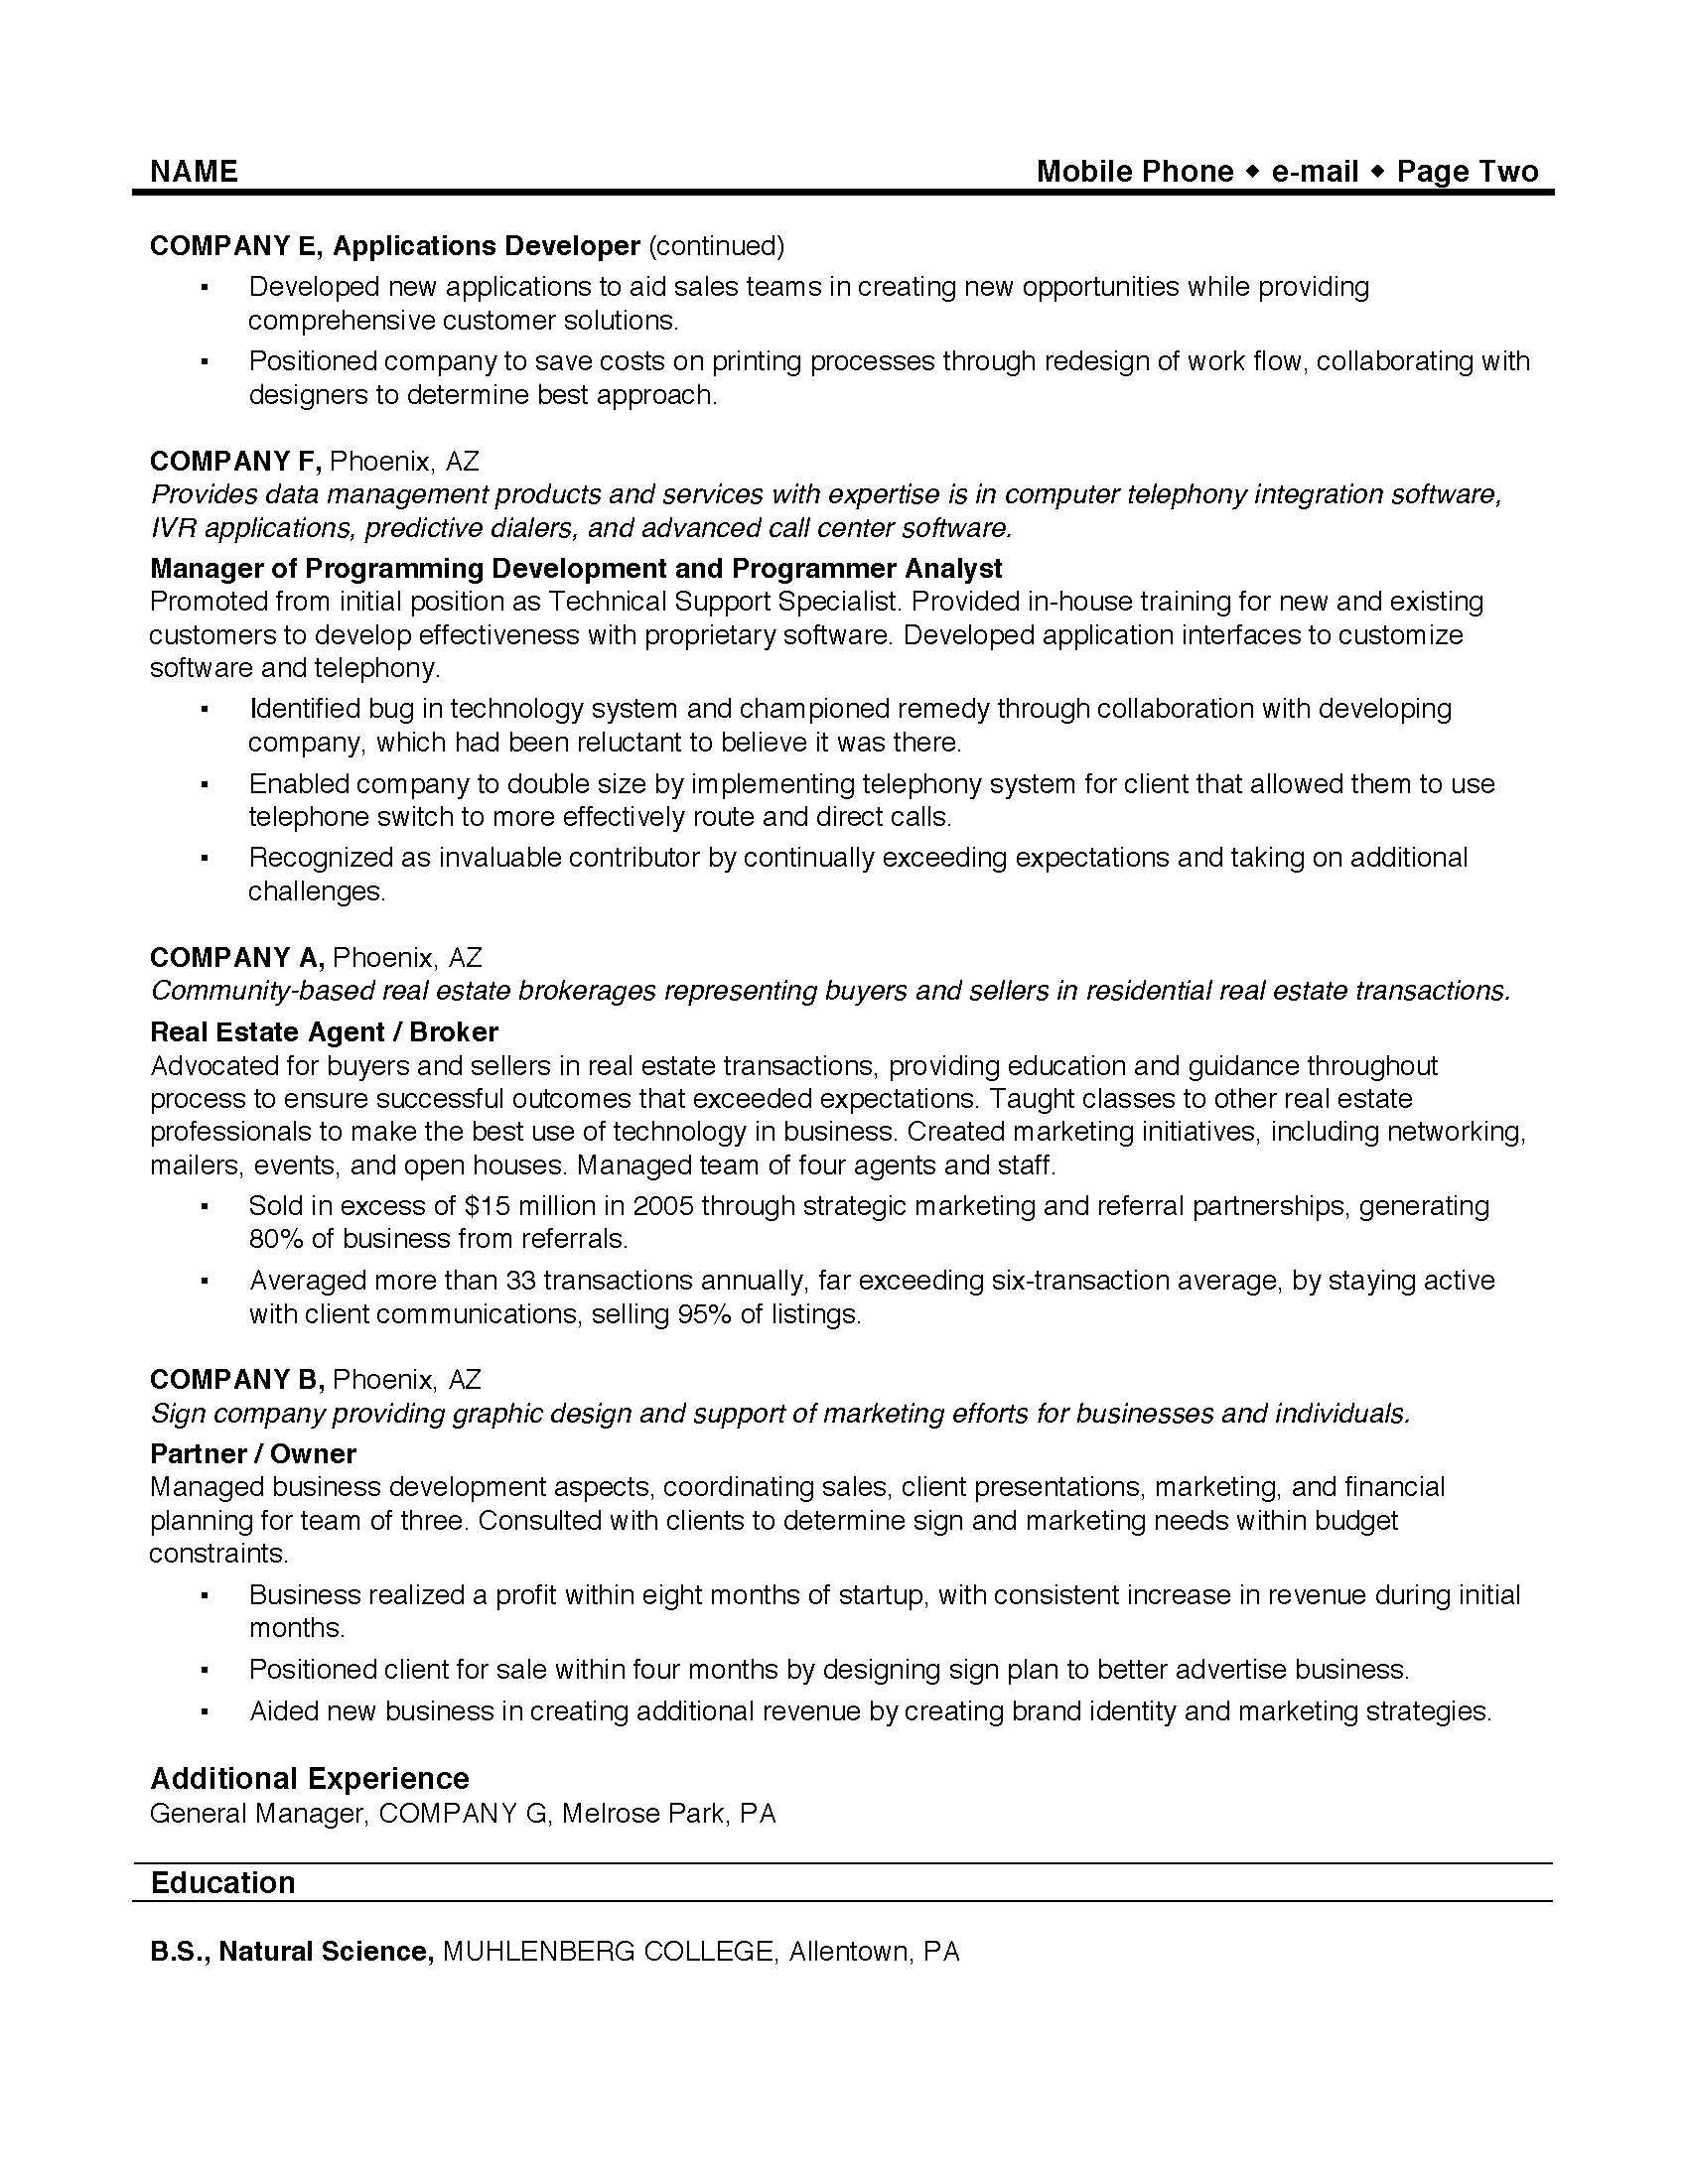 Sample Resume for Student Summer Job 10 Cute Summer Ideas for College Students 2020